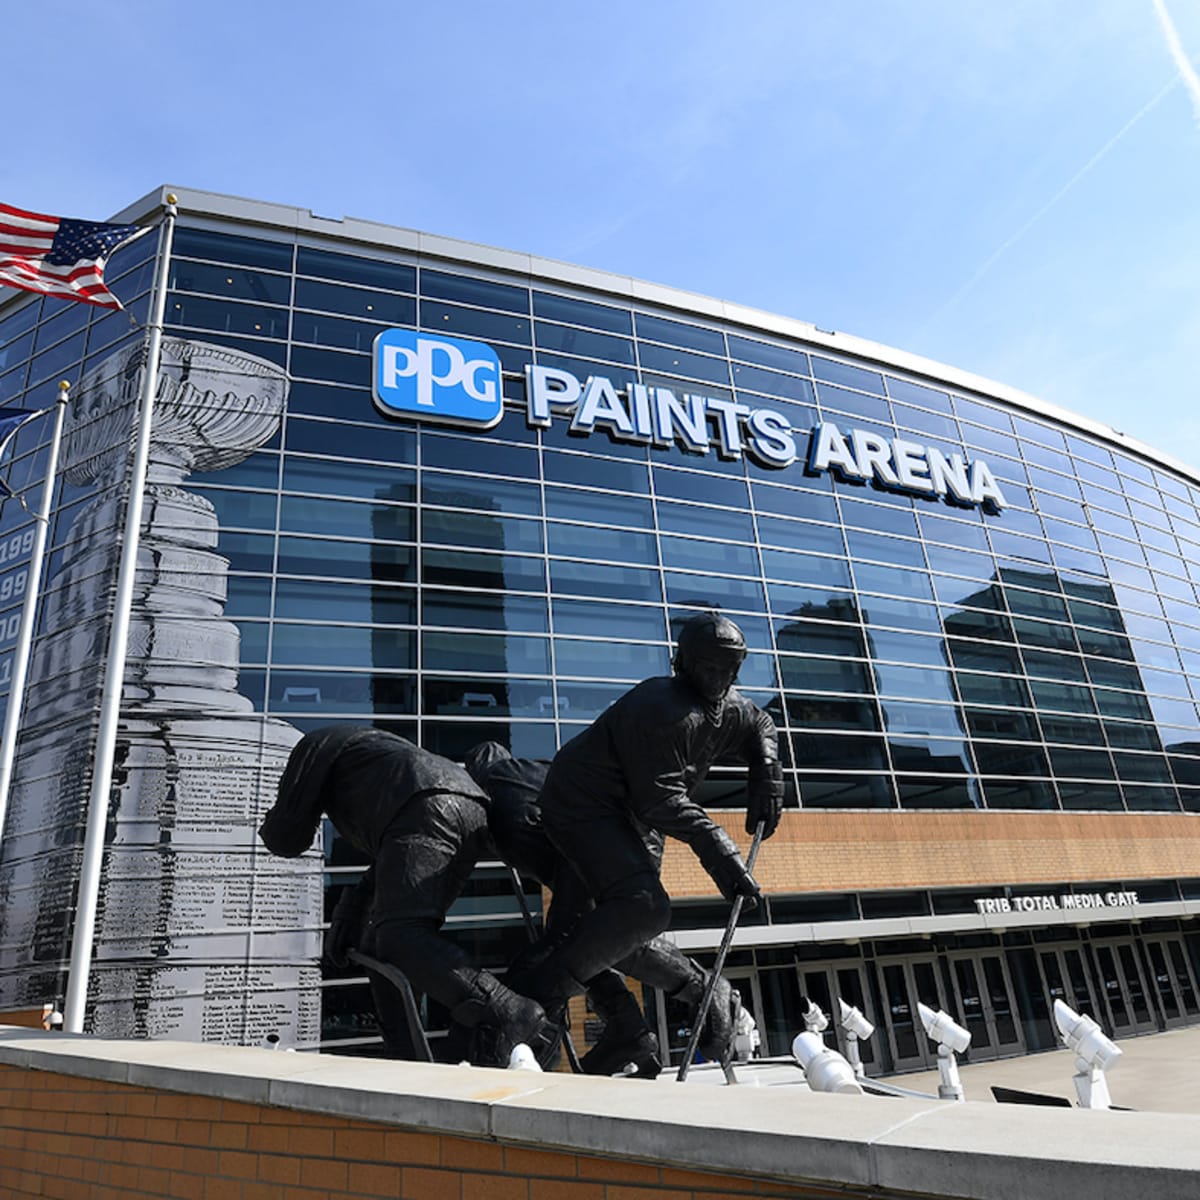 Penguins, Fenway select new management group for PPG Paints Arena